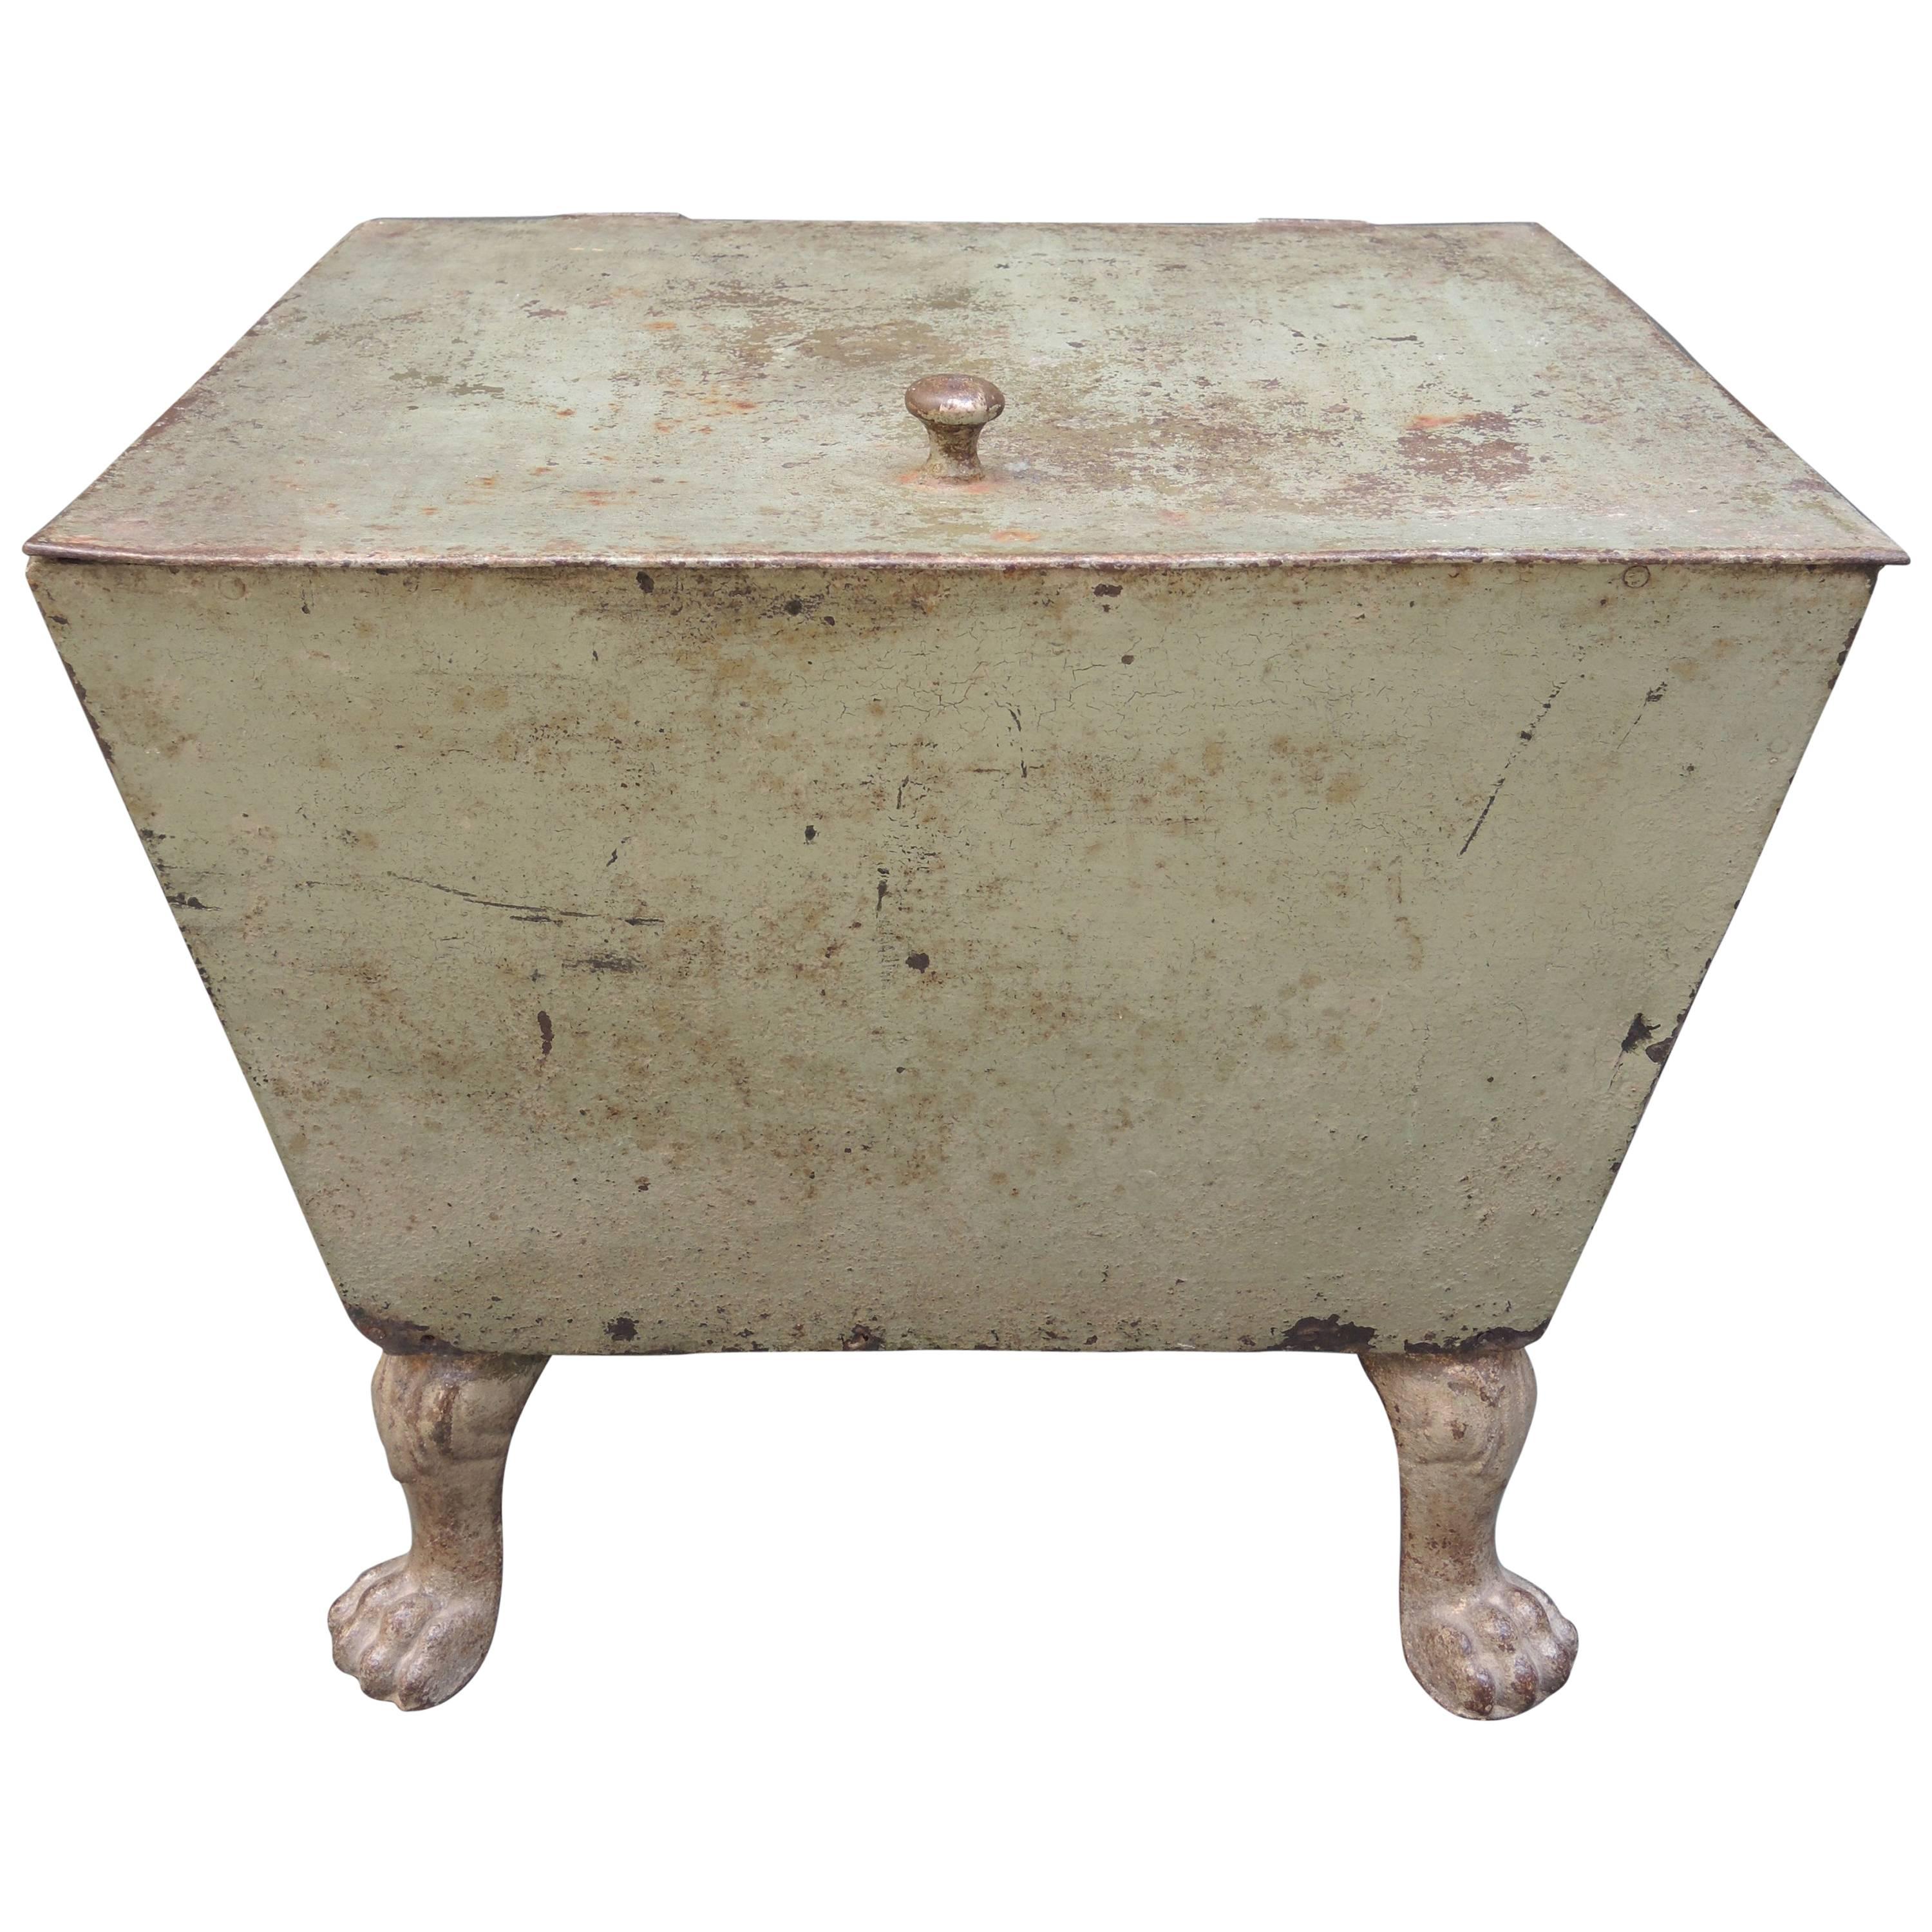 19th Century French Iron Box with Lion Paw Feet and the Original Green Paint